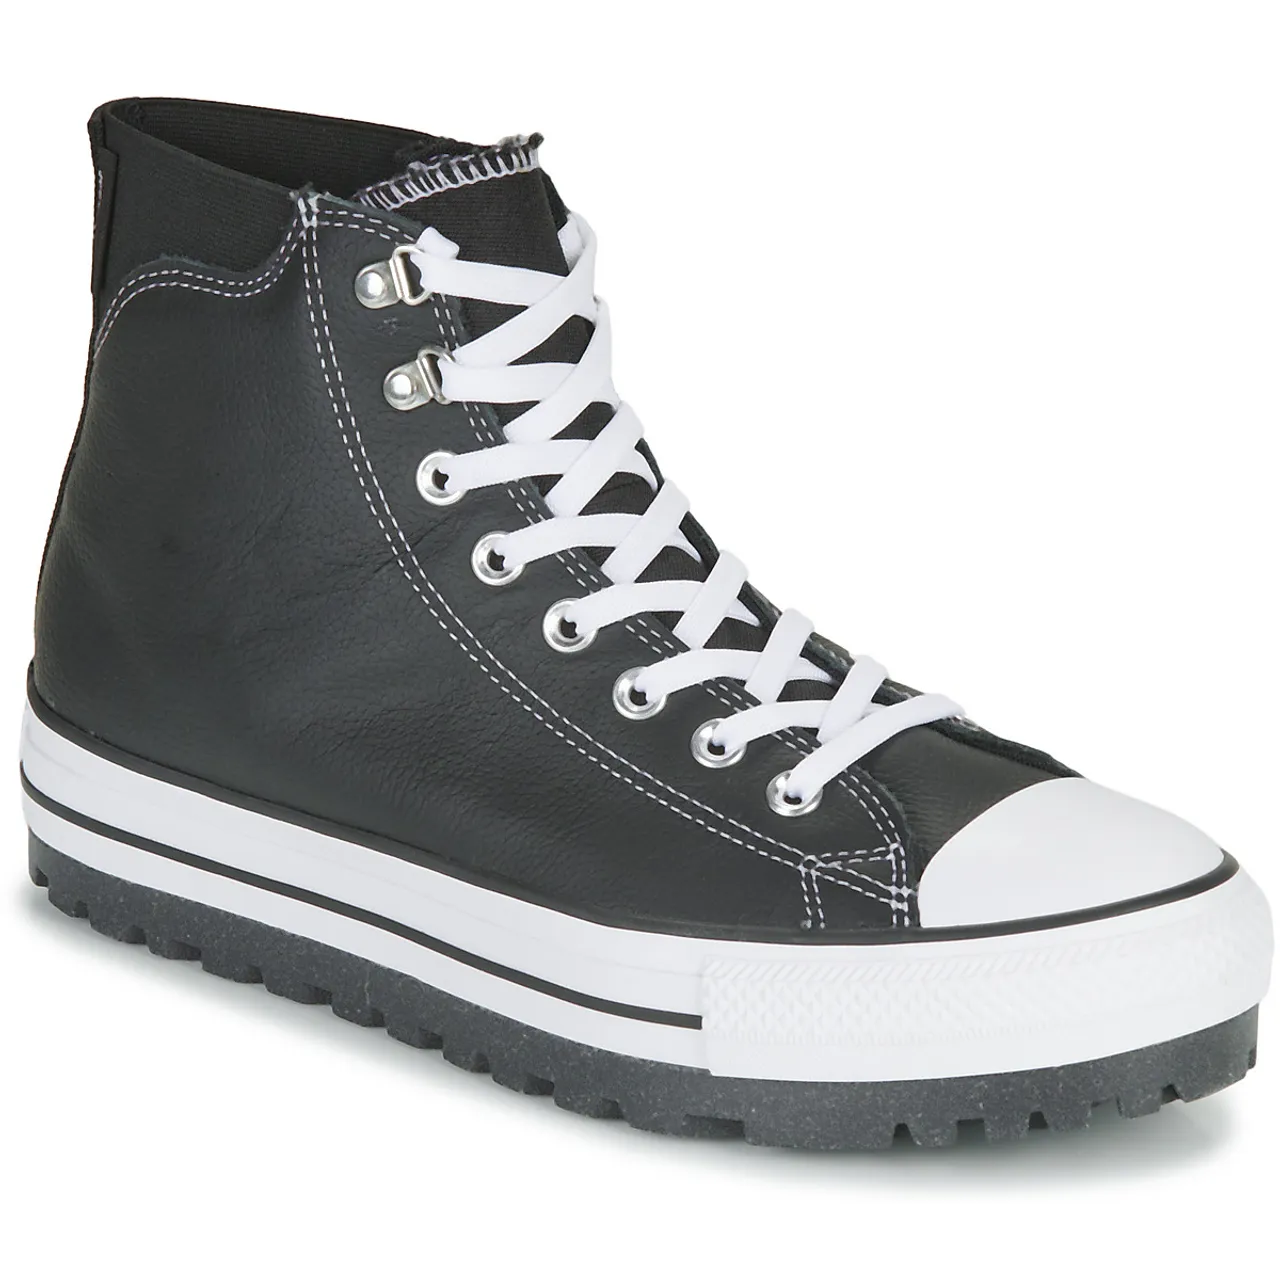 Converse  CHUCK TAYLOR ALL STAR CITY TREK WATERPROOF BOOT  men's Shoes (High-top Trainers) in Black